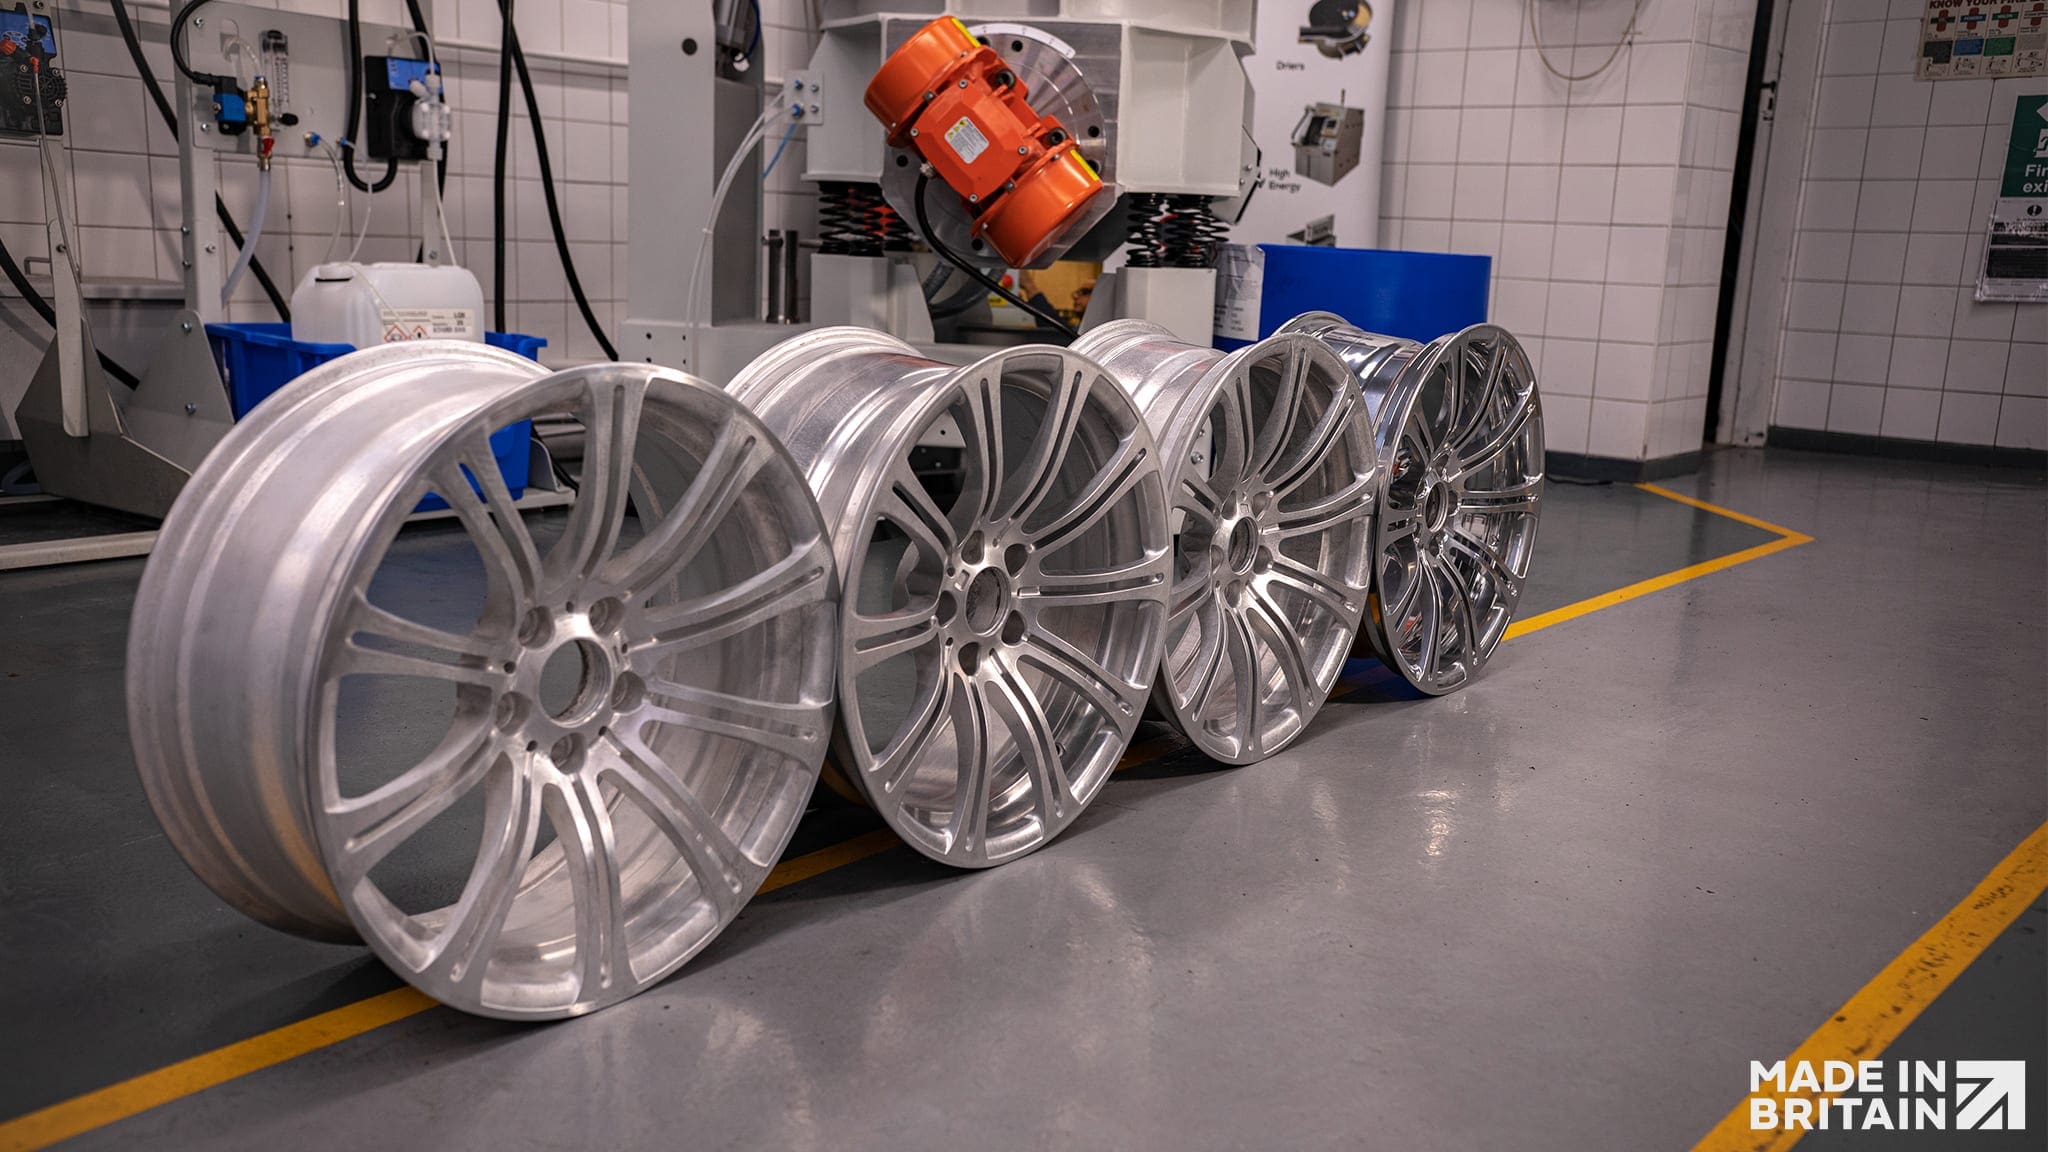 If you want to keep automotive wheels looking like new or if you are a manufacturer who needs to polish alloy wheels to a bright finish keep reading.